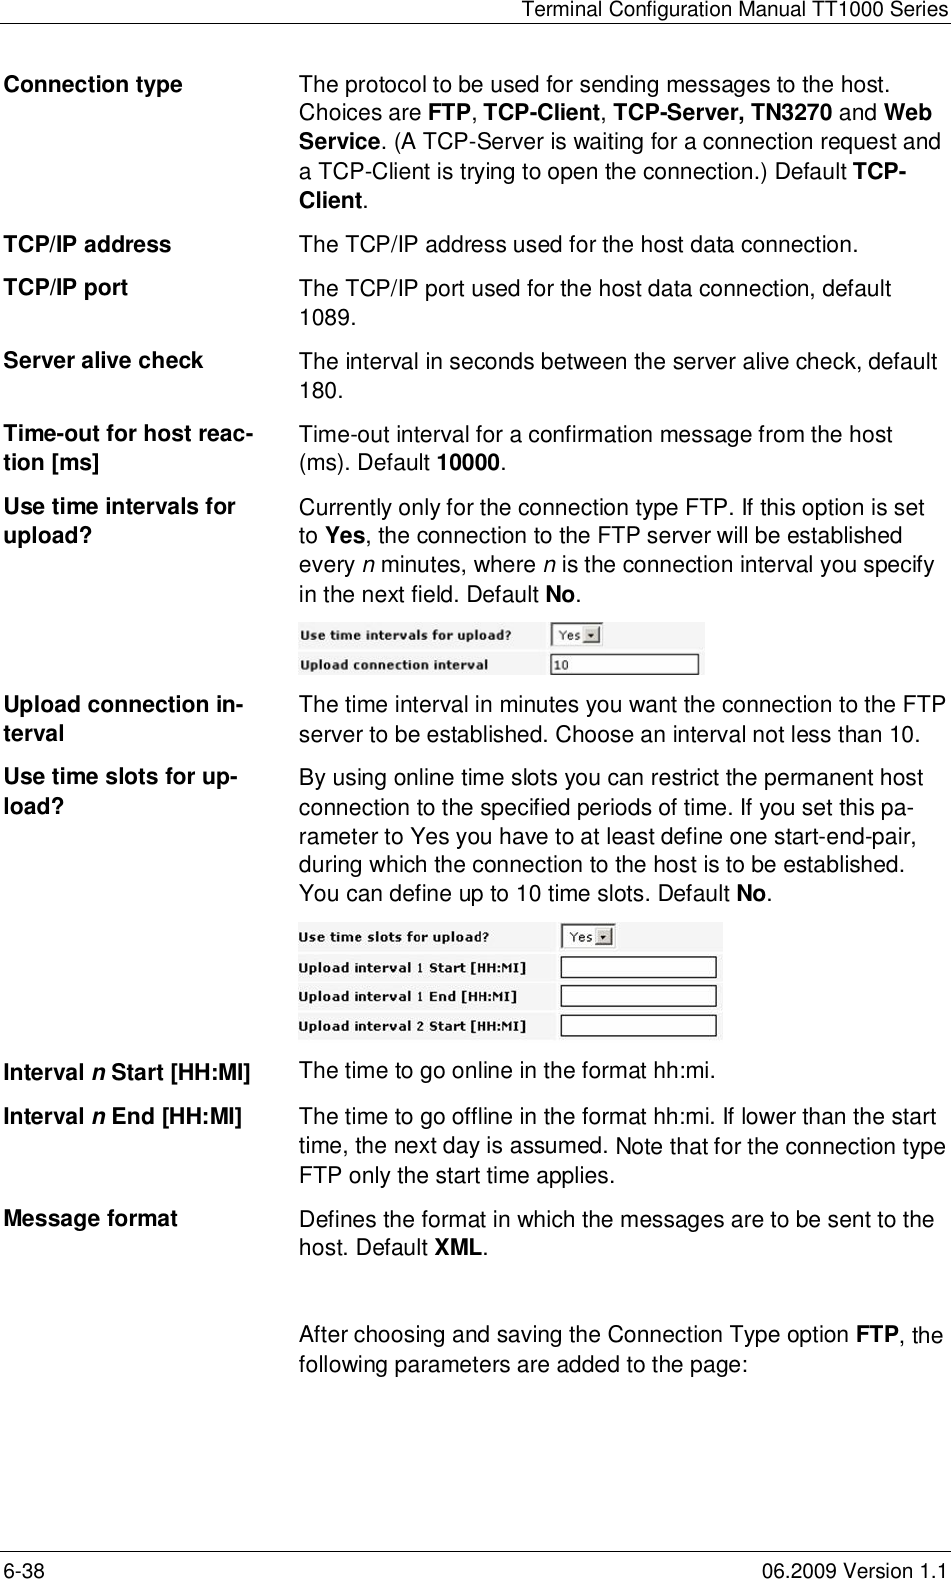 Terminal Configuration Manual TT1000 Series6-38 06.2009 Version 1.1Connection type The protocol to be used for sending messages to the host.Choices are FTP,TCP-Client,TCP-Server, TN3270 and WebService. (A TCP-Server is waiting for a connection request anda TCP-Client is trying to open the connection.) Default TCP-Client.TCP/IP address The TCP/IP address used for the host data connection.TCP/IP port The TCP/IP port used for the host data connection, default1089.Server alive check The interval in seconds between the server alive check, default180.Time-out for host reac-tion [ms] Time-out interval for a confirmation message from the host(ms). Default 10000.Use time intervals forupload? Currently only for the connection type FTP. If this option is setto Yes, the connection to the FTP server will be establishedevery nminutes, where n is the connection interval you specifyin the next field. Default No.Upload connection in-tervalThe time interval in minutes you want the connection to the FTPserver to be established. Choose an interval not less than 10.Use time slots for up-load? By using online time slots you can restrict the permanent hostconnection to the specified periods of time. If you set this pa-rameter to Yes you have to at least define one start-end-pair,during which the connection to the host is to be established.You can define up to 10 time slots. Default No.Interval n Start [HH:MI] The time to go online in the format hh:mi.Interval n End [HH:MI] The time to go offline in the format hh:mi. If lower than the starttime, the next day is assumed.Note that for the connection typeFTP only the start time applies.Message format Defines the format in which the messages are to be sent to thehost. Default XML.After choosing and saving the Connection Type option FTP, thefollowing parameters are added to the page: